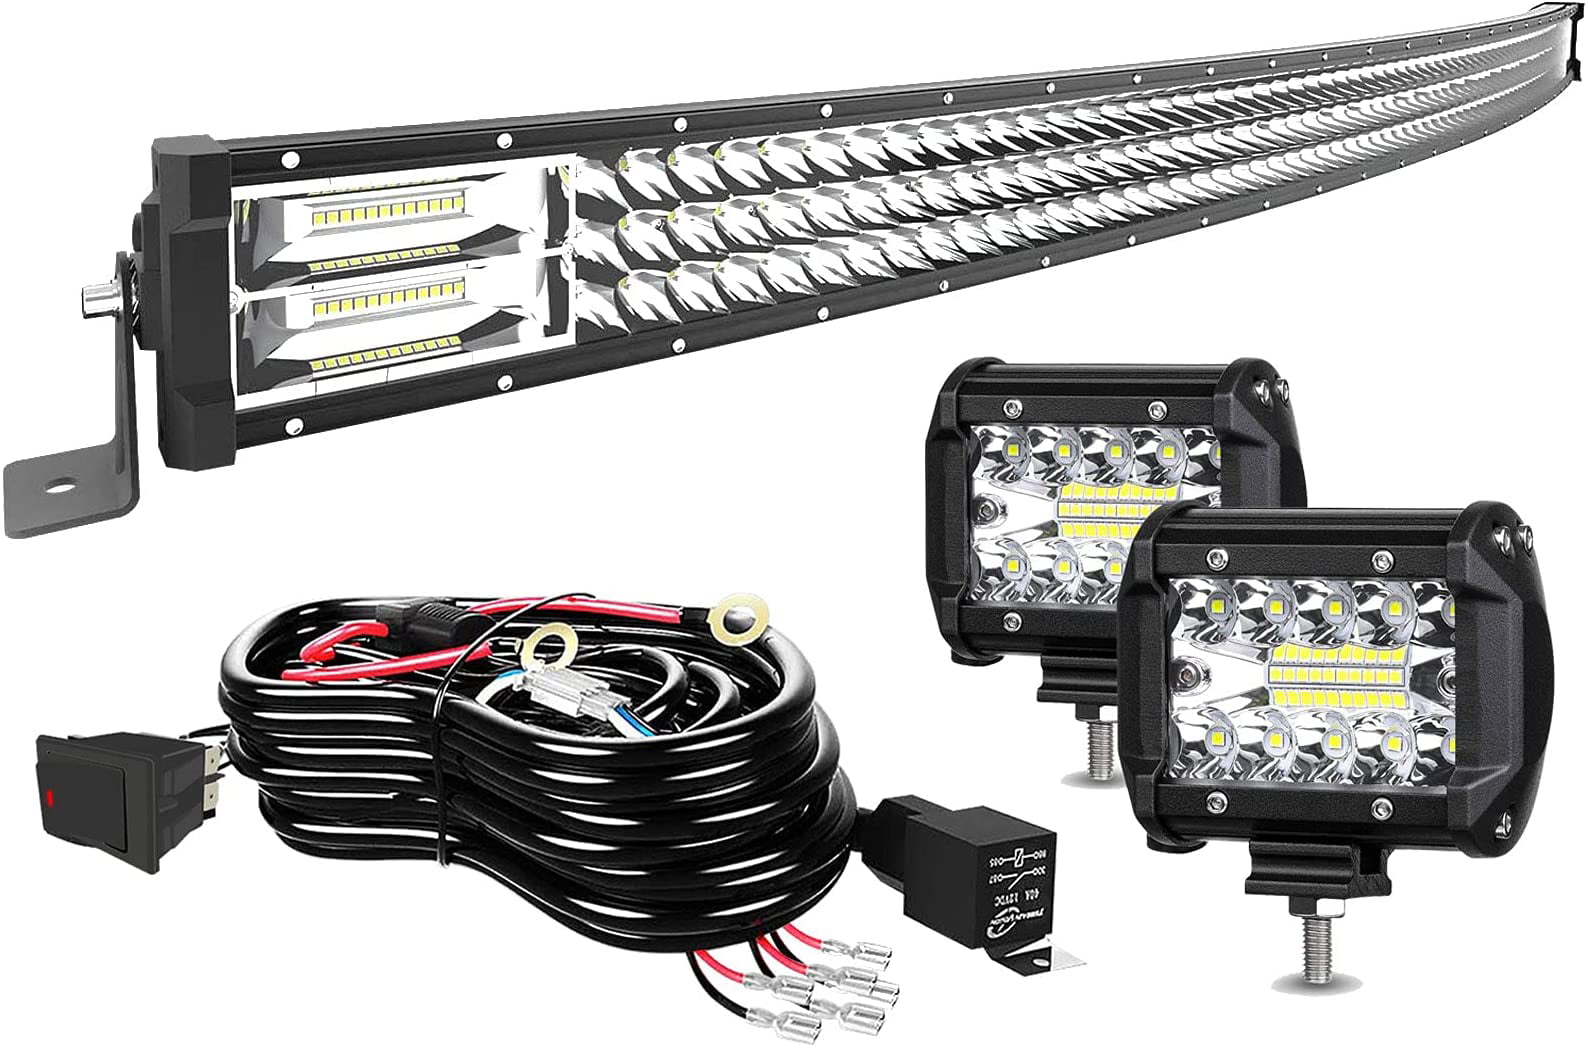 TURBO SII 50 LED Light Bar Curved Triple Row 684W Flood Spot Combo Beam Led Bar W/ 2Pcs 4in Off Road Driving Fog Lights with Wiring Harness-3 Leads for Jeep Trucks Polaris ATV Boats Lighting 